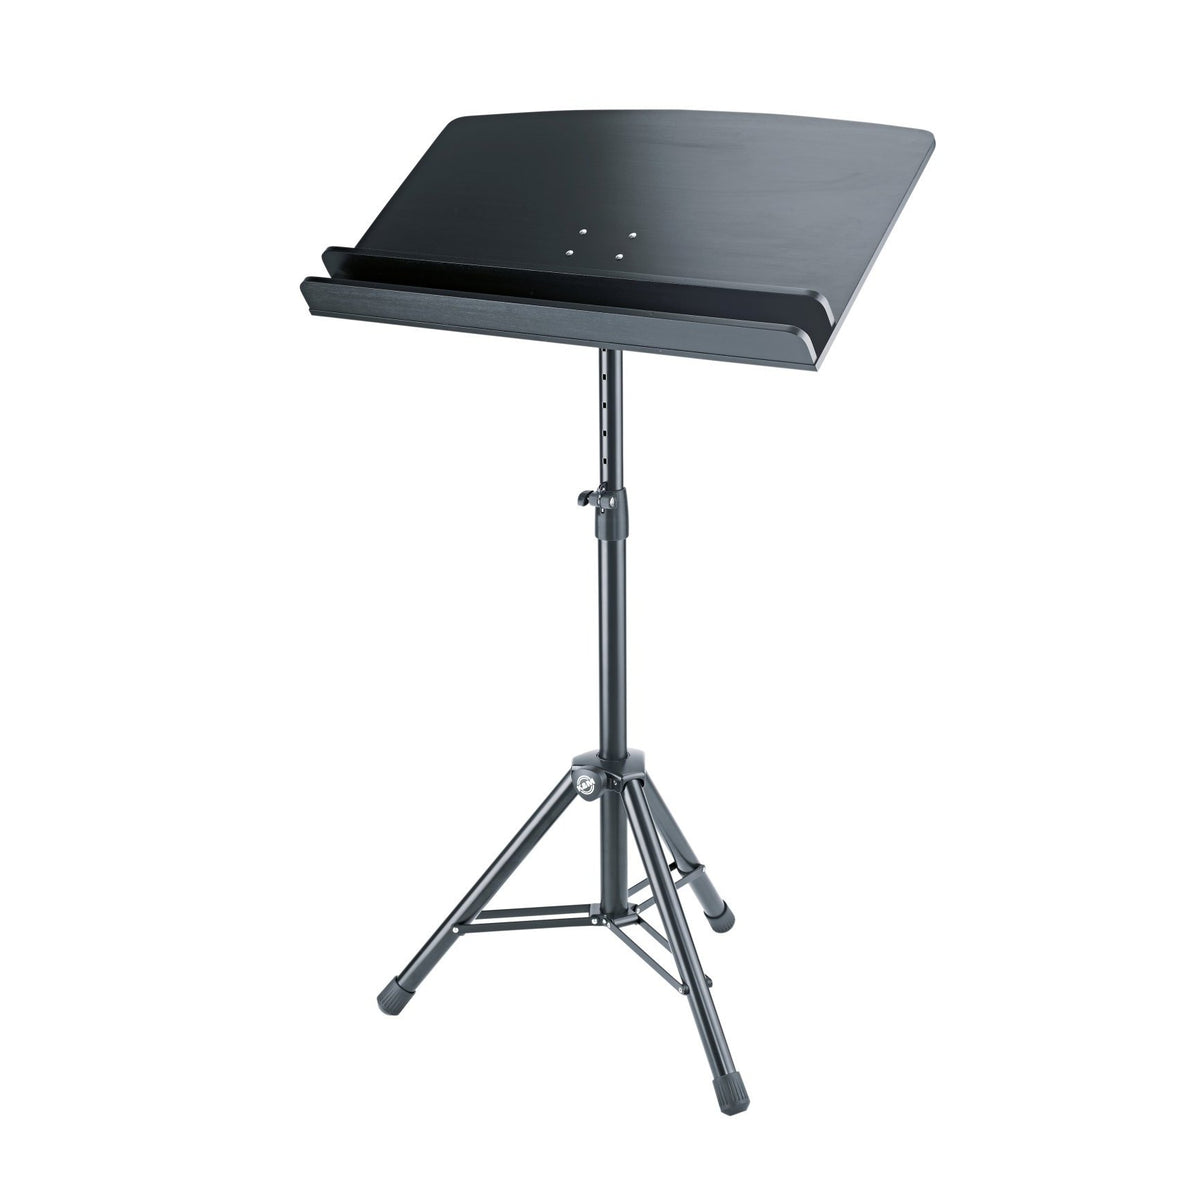 KÃ¶nig &amp; Meyer - 12335 Orchestra Conductor Stand Desks-Music Stand-KÃ¶nig &amp; Meyer-Music Elements